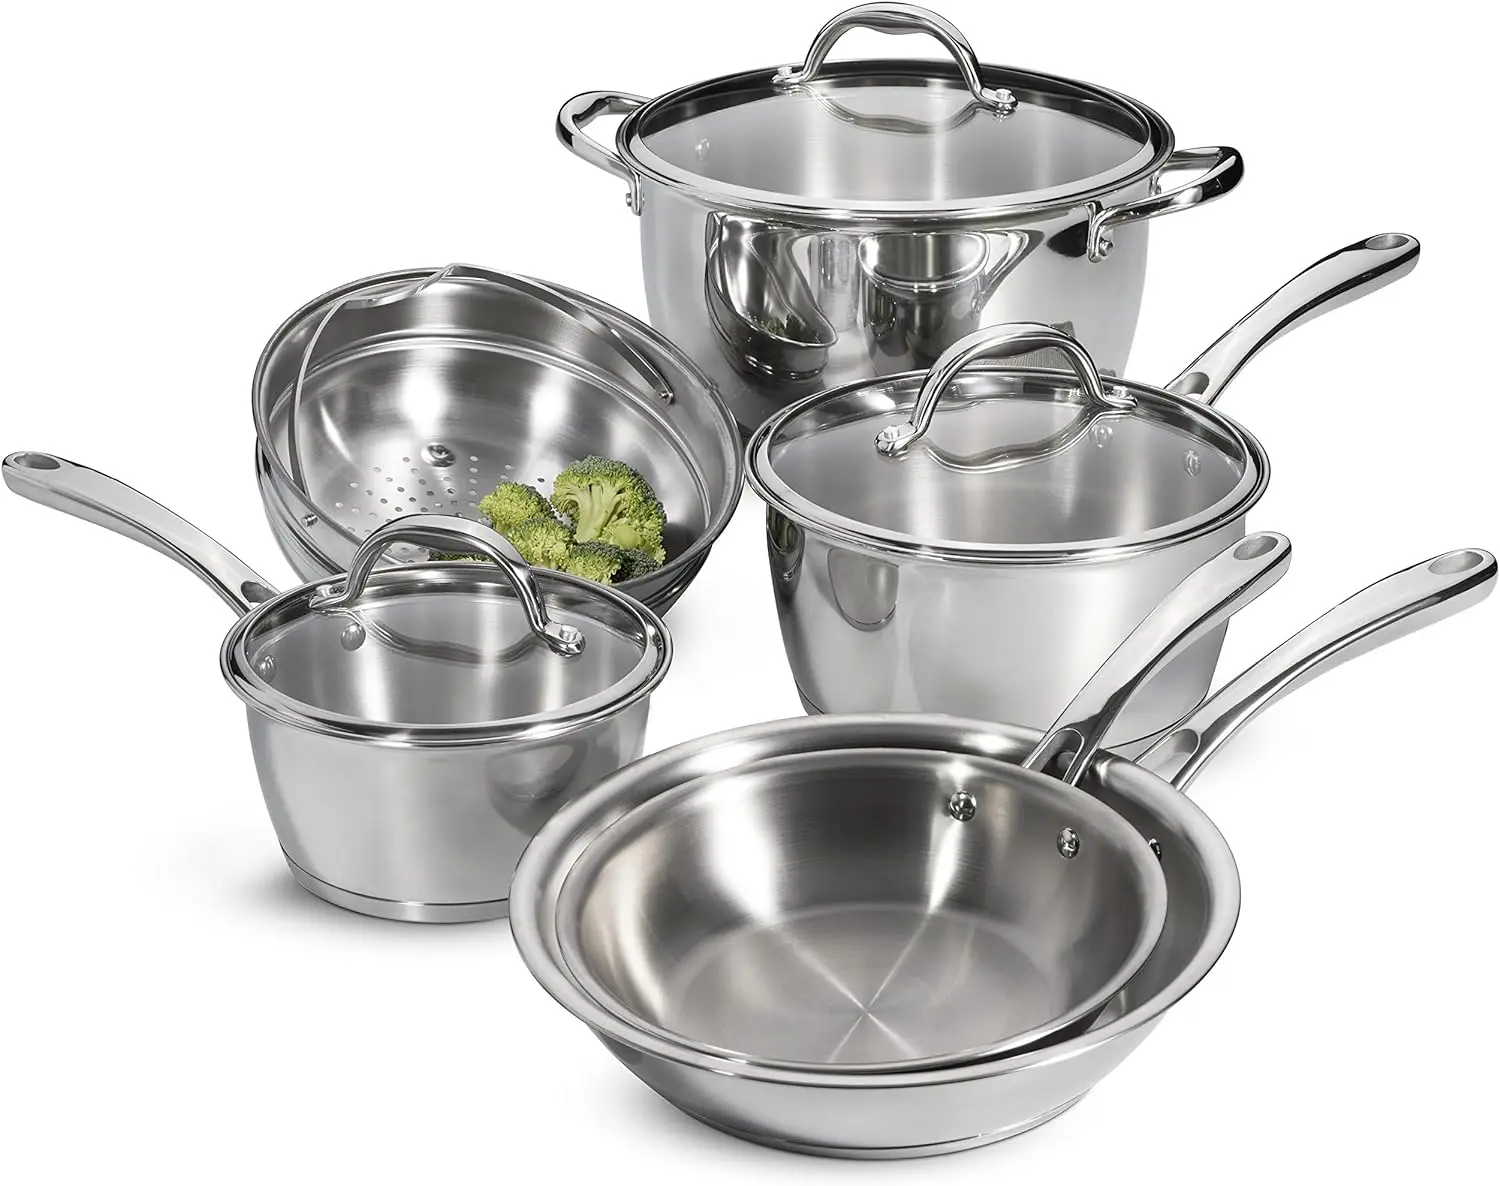 

Tri-Ply Base Stainless-Steel Cookware Set, Induction-Ready, 9-Piece